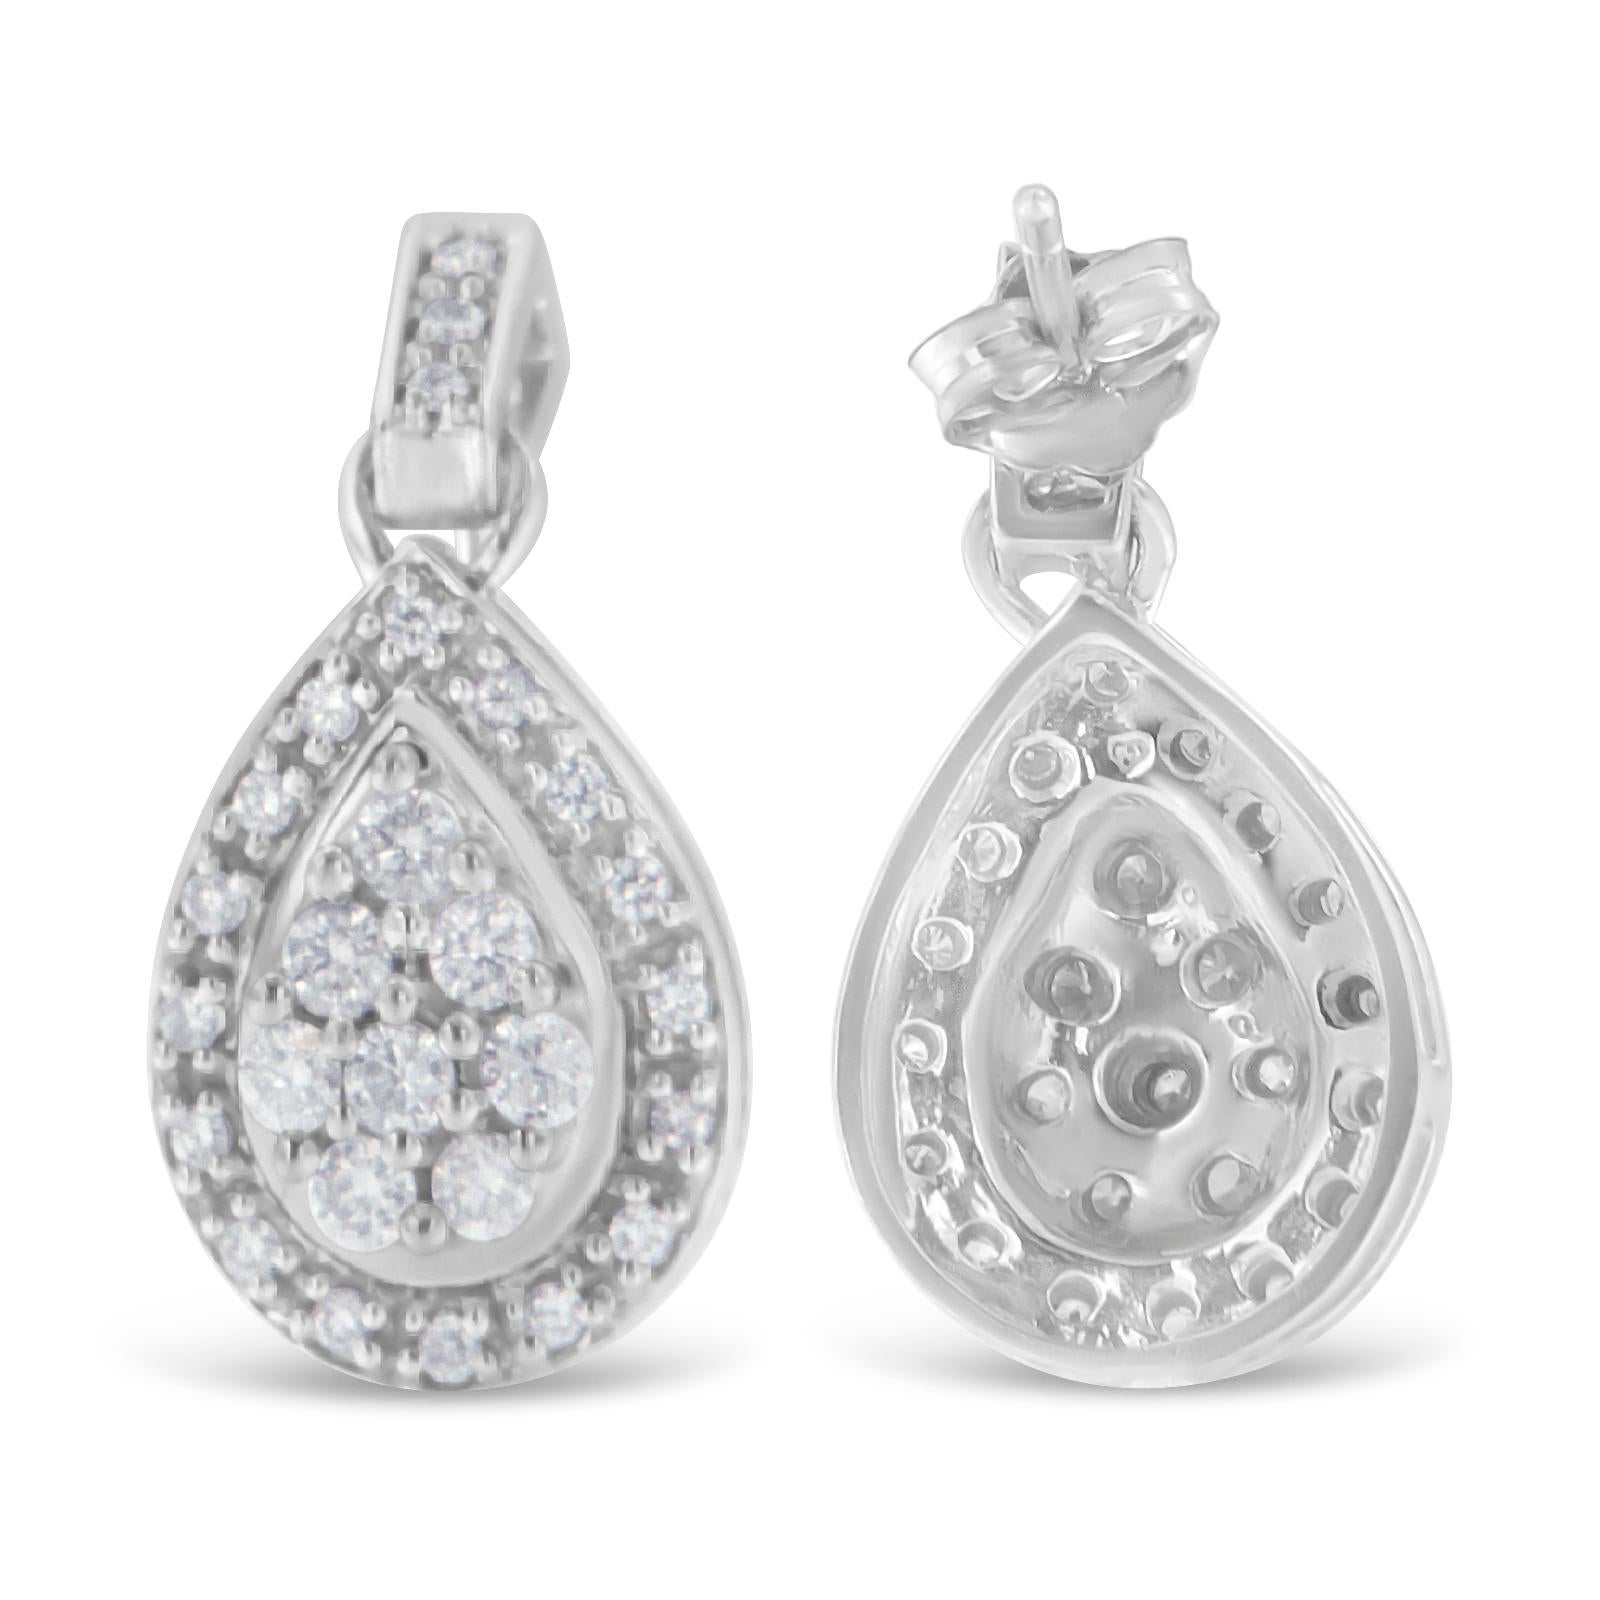 Contemporary 10K White Gold 3/4 Carat Round Cut Diamond Earrings For Sale